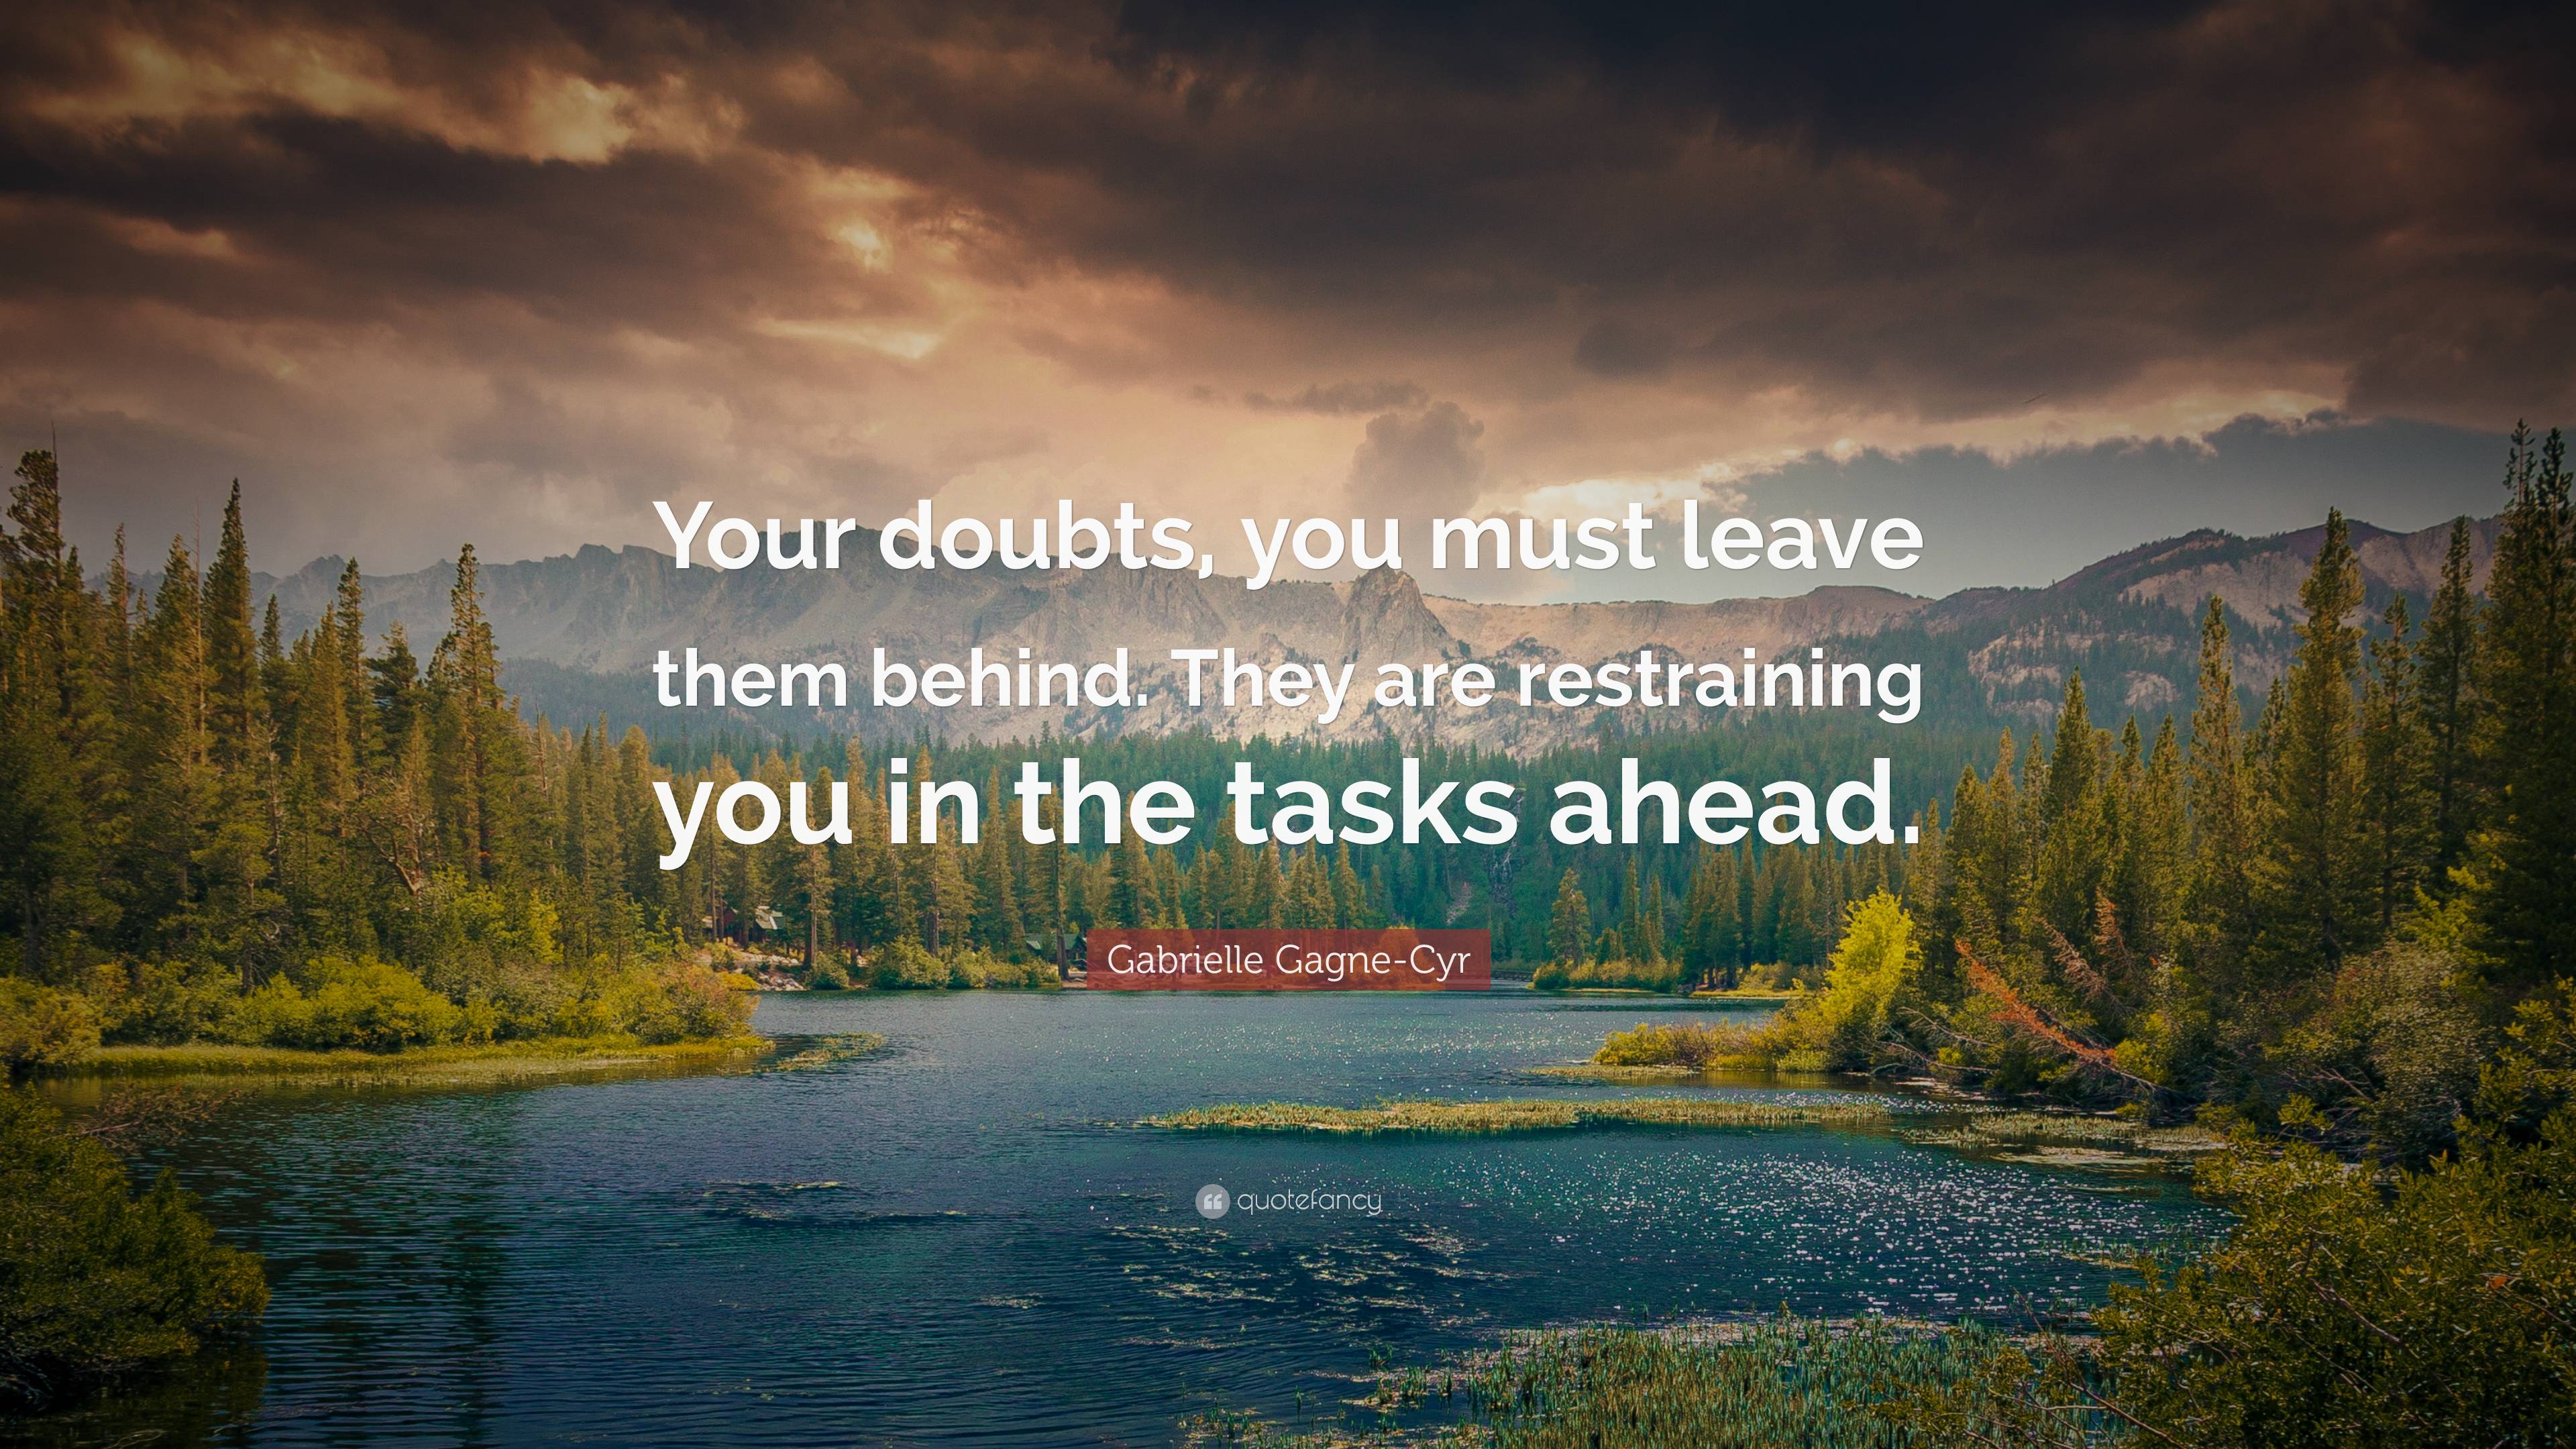 Gabrielle Gagne-Cyr Quote: “Your doubts, you must leave them behind ...